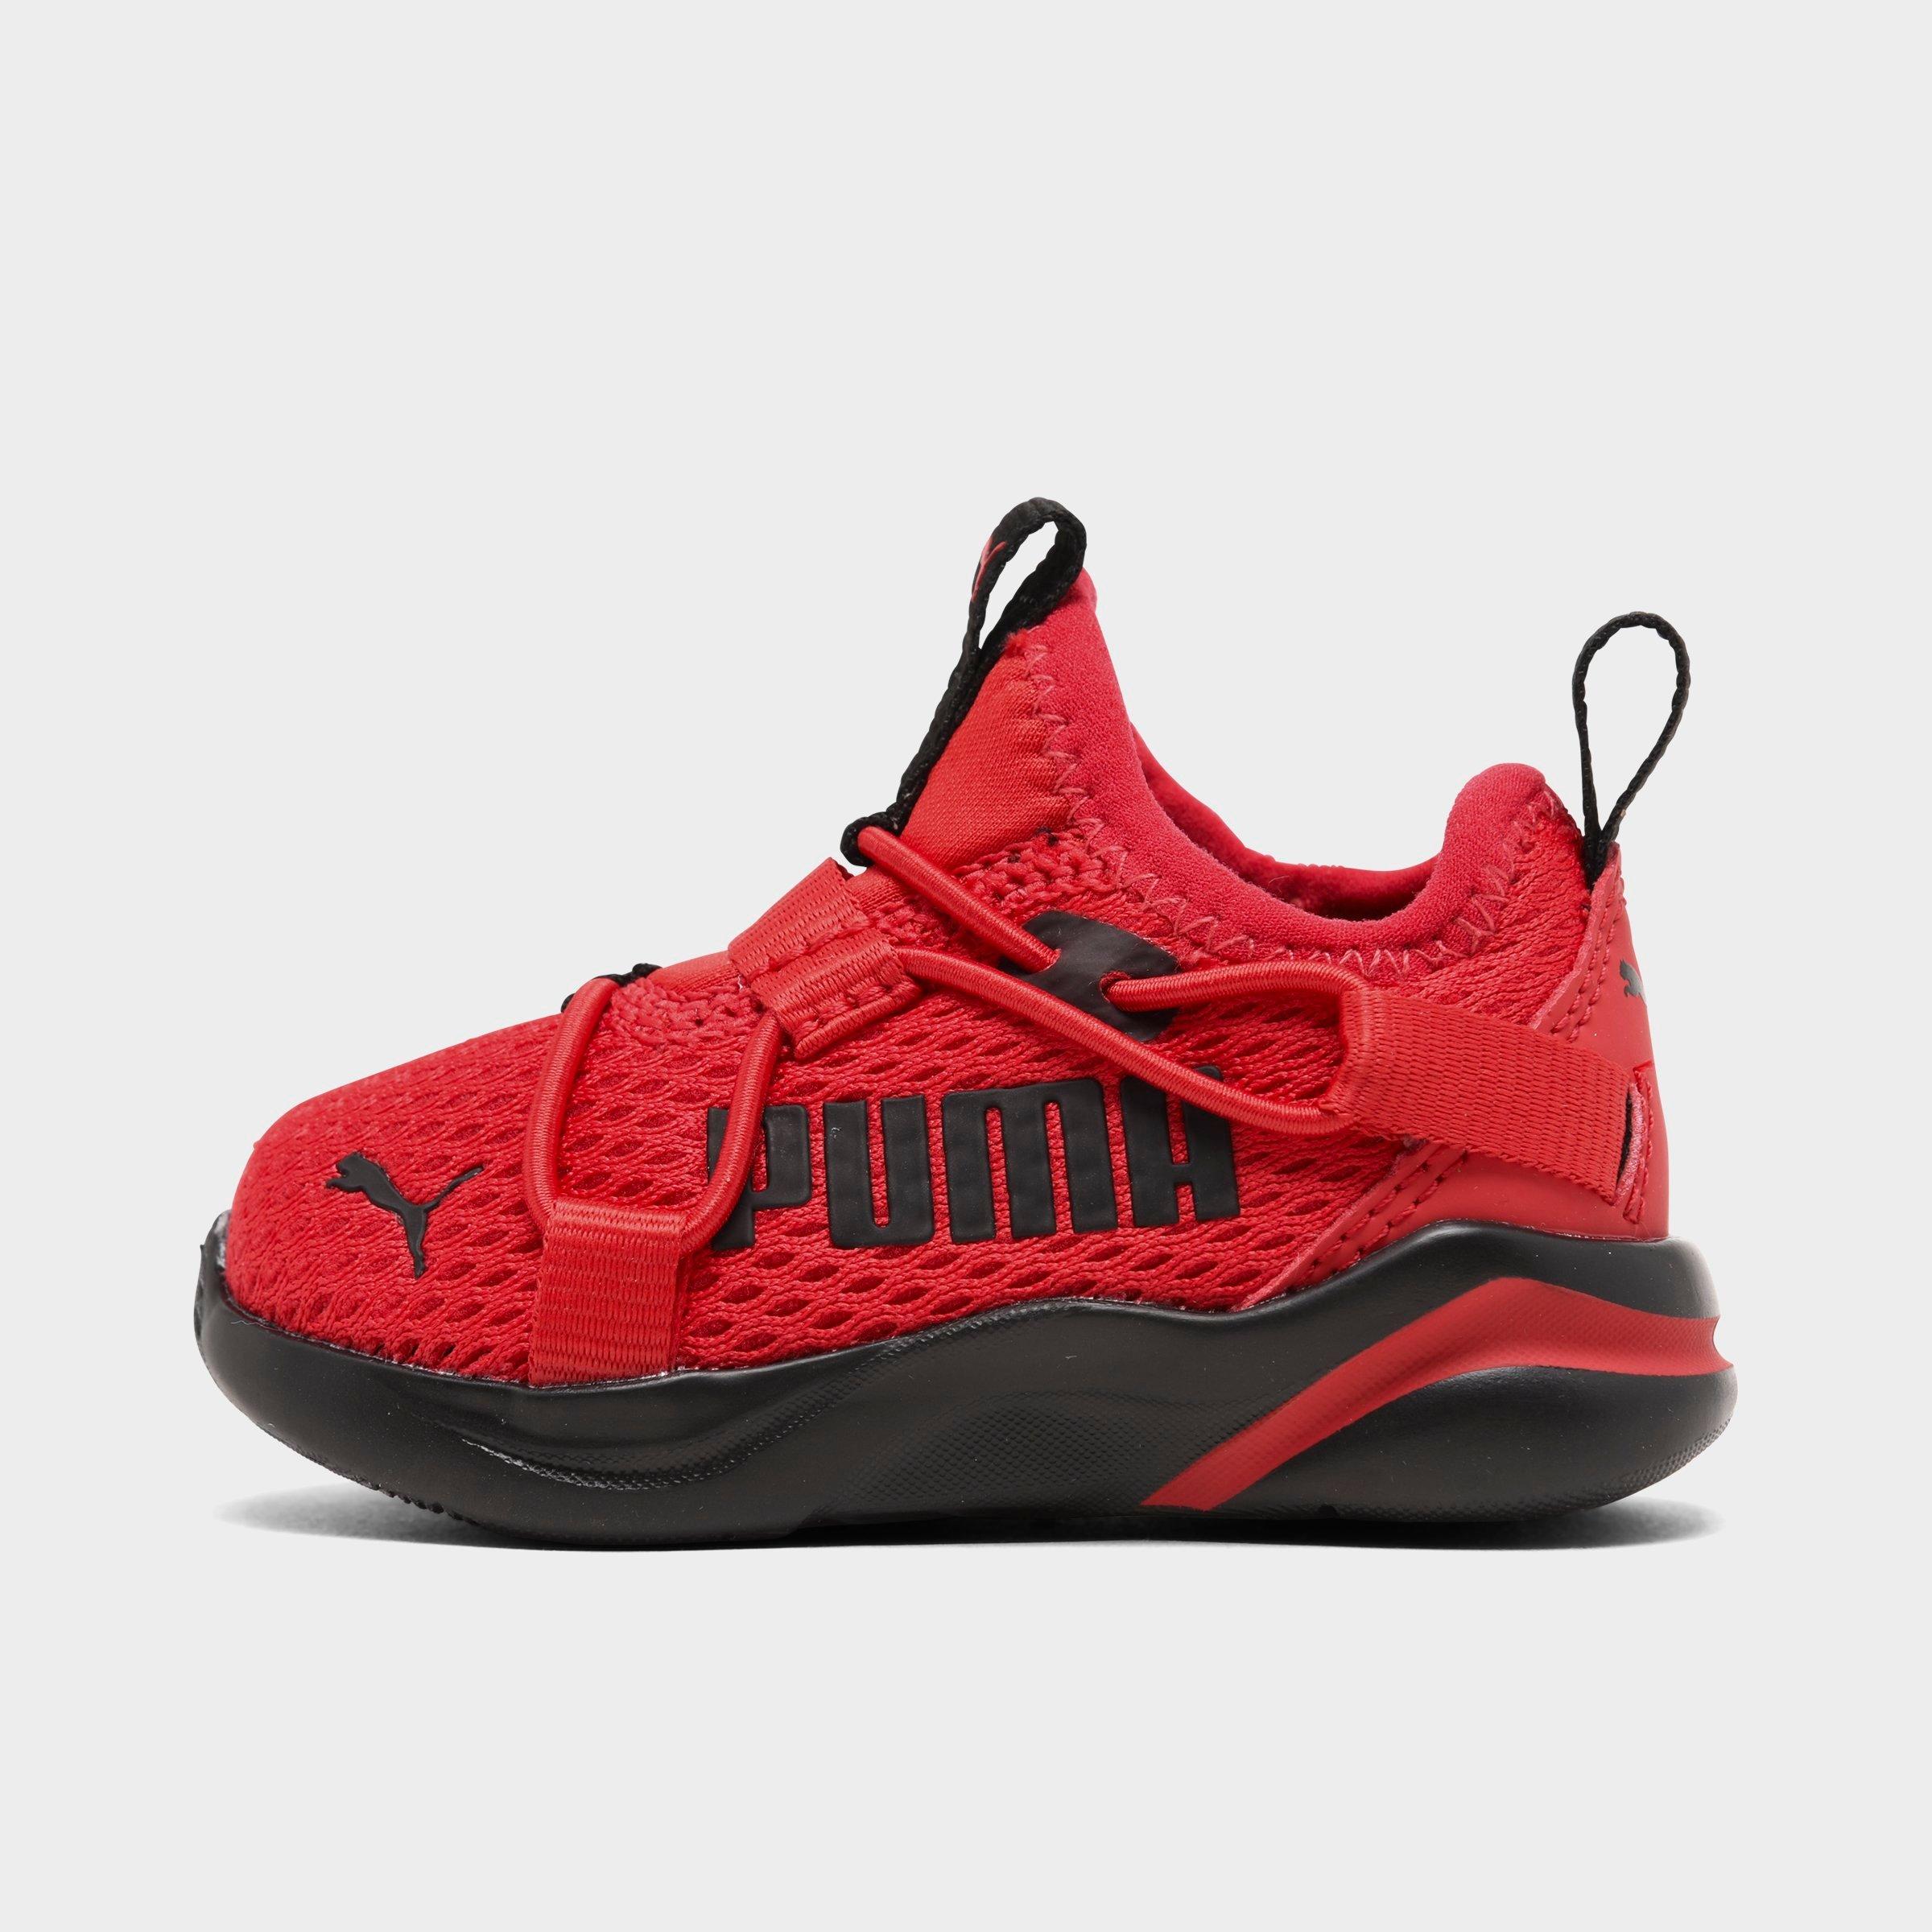 puma shoes model and price